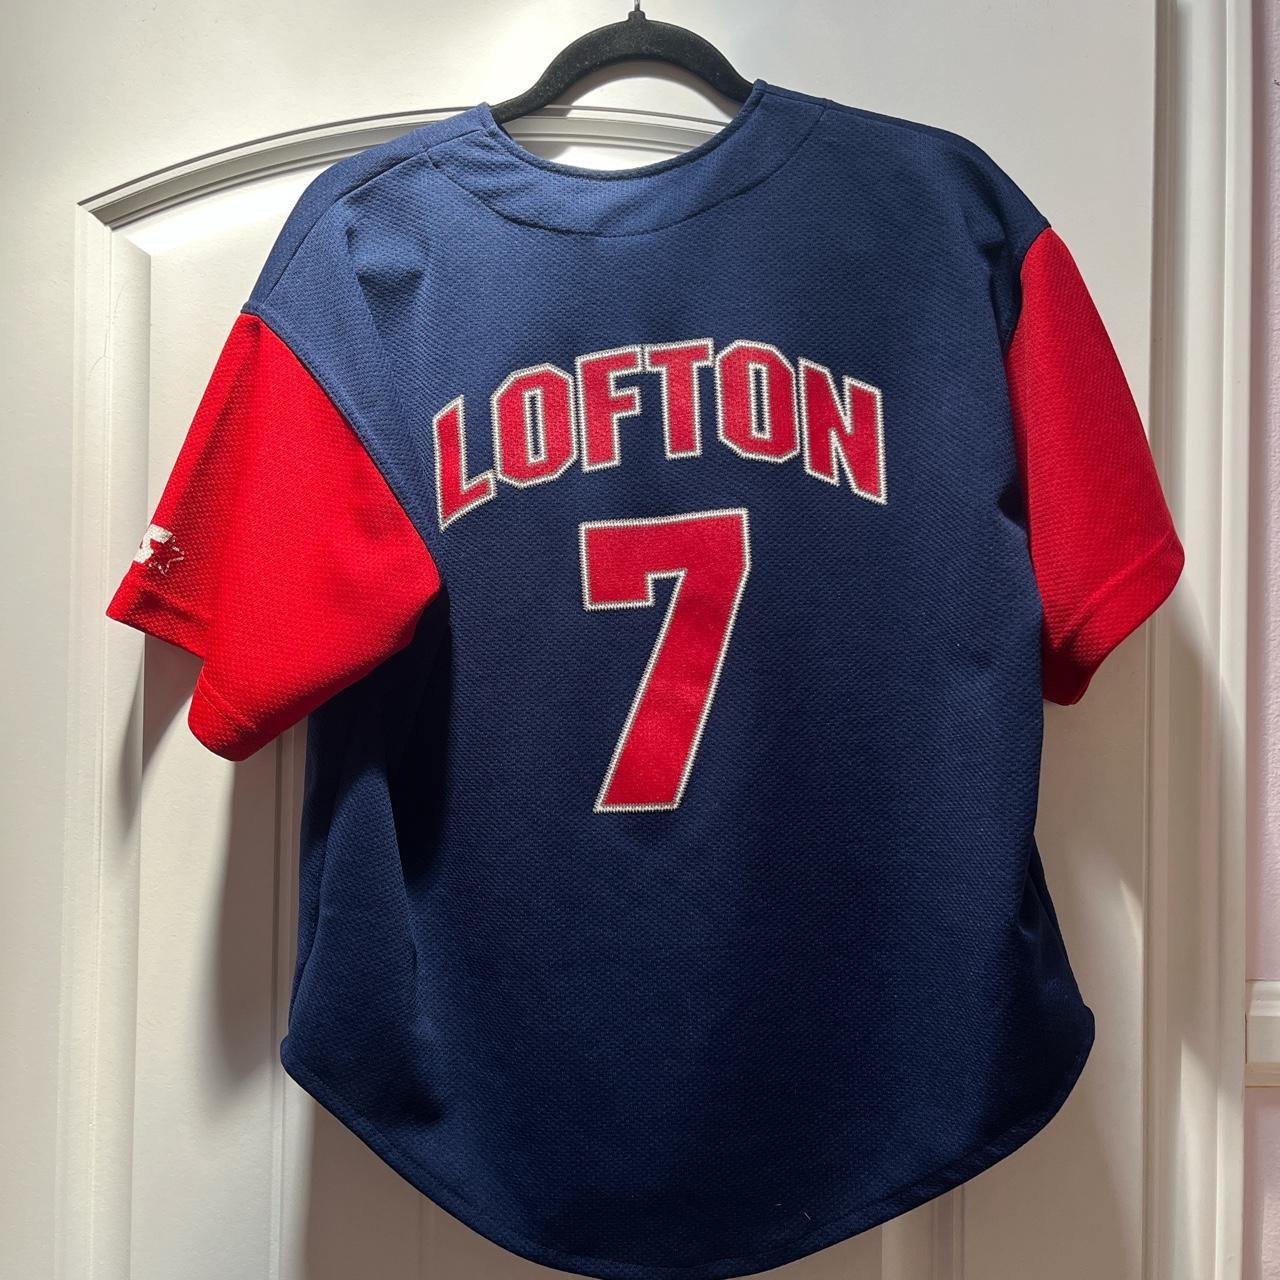 Boston Red Sox Jersey by Starter (XL)